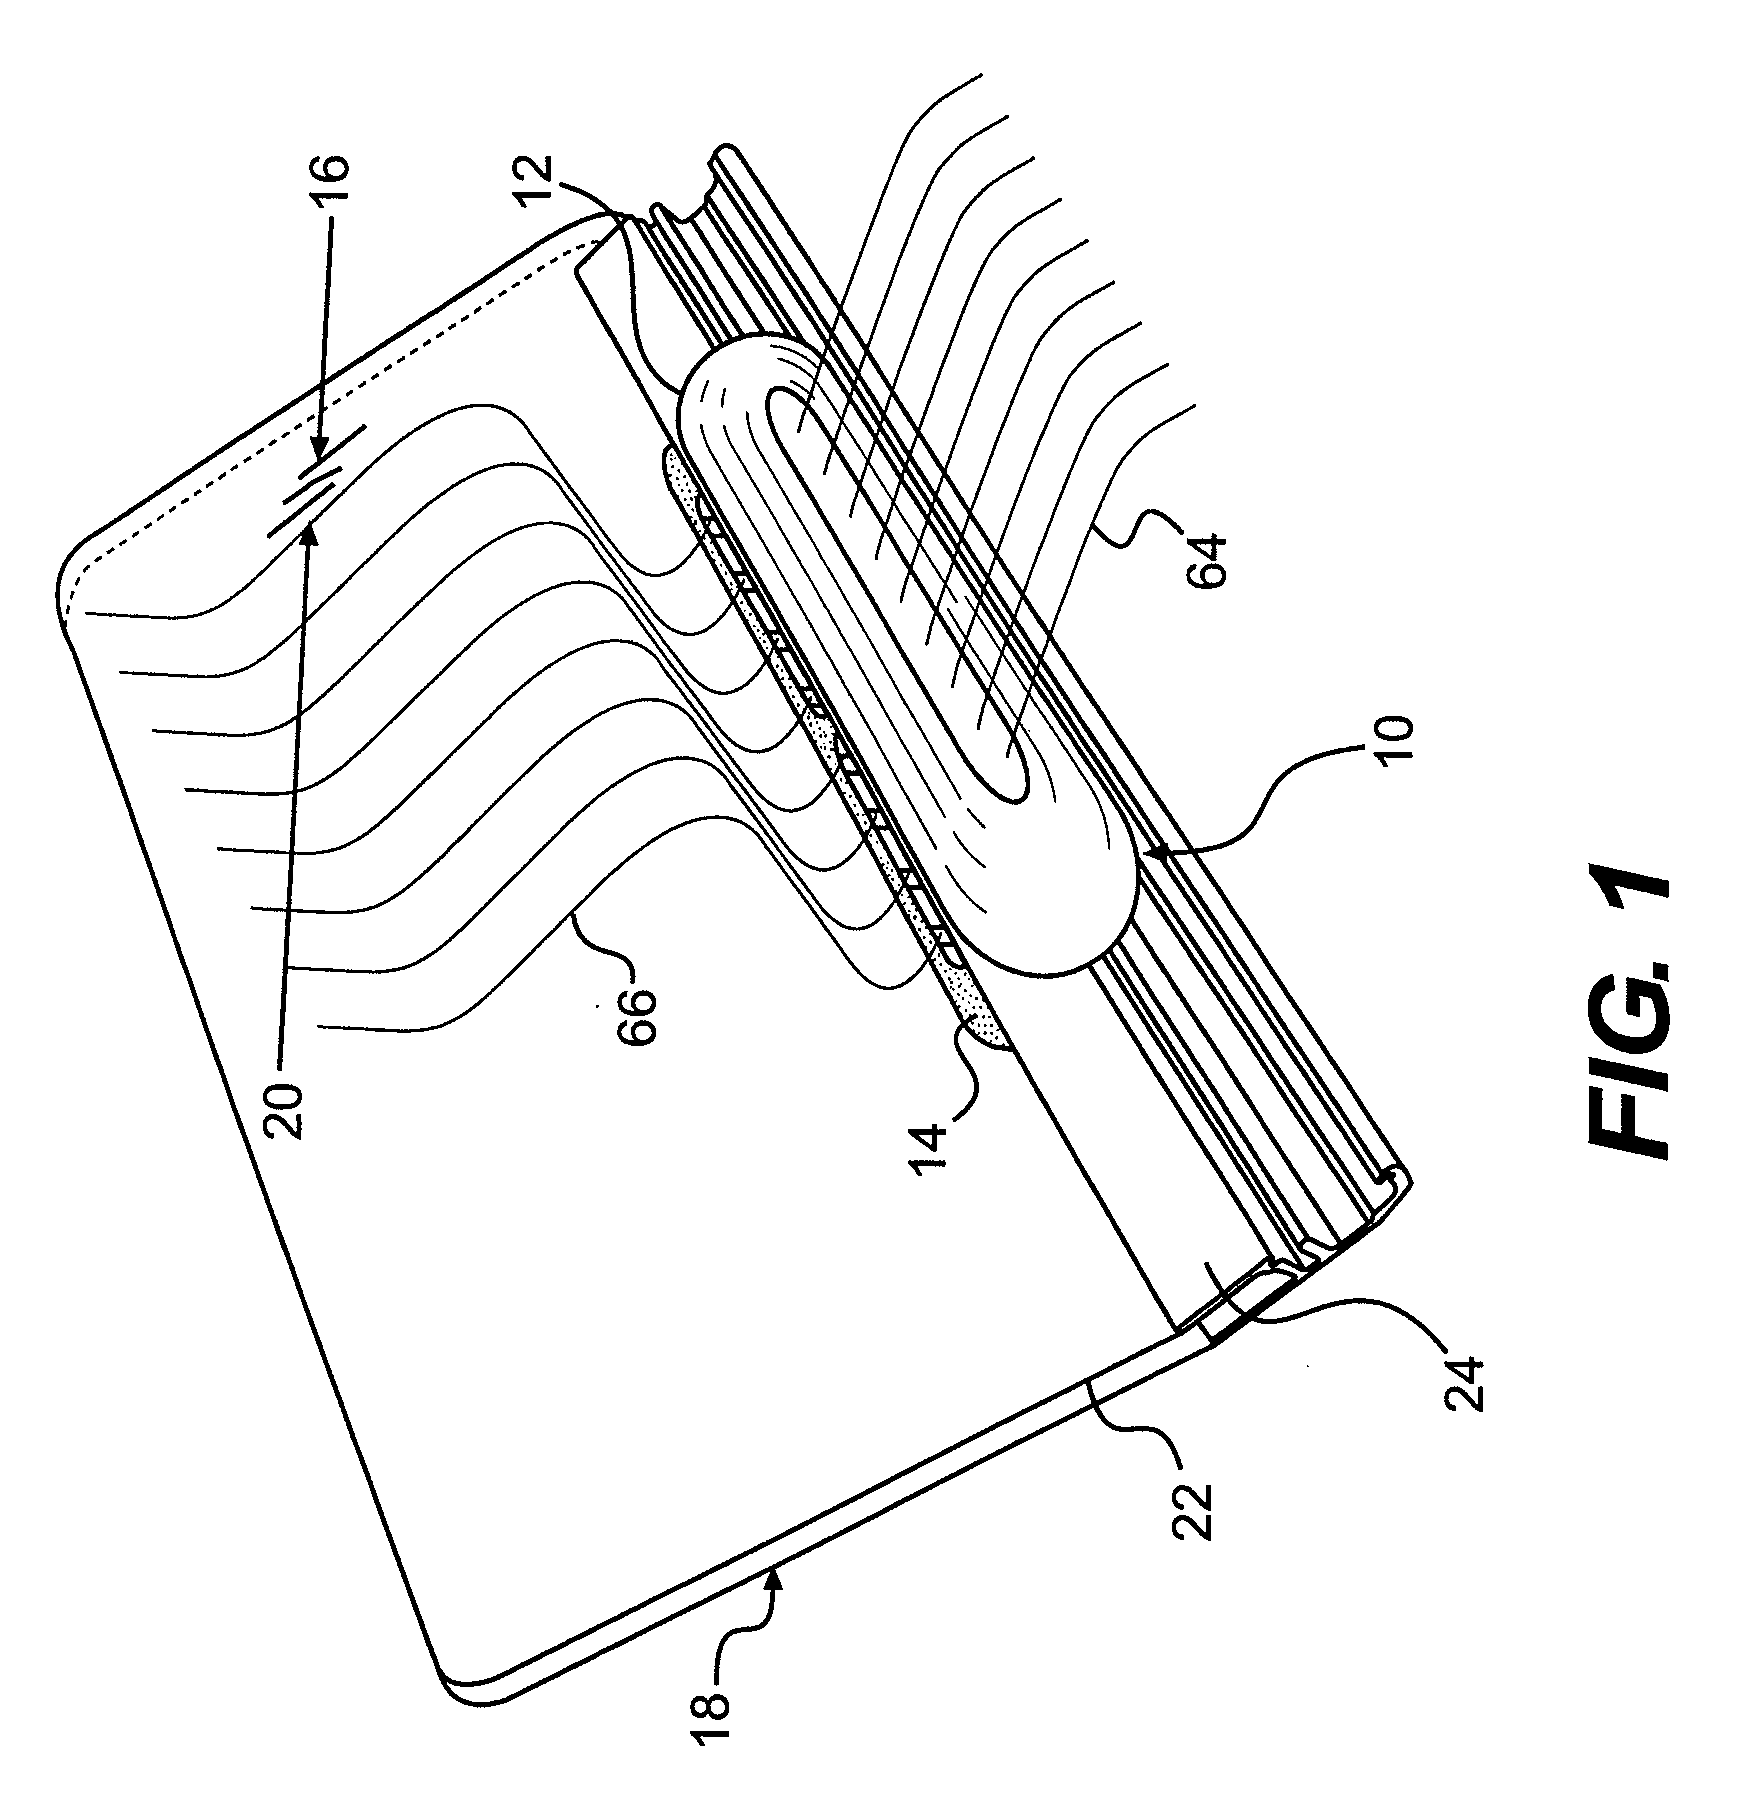 Boat windshield with vent structure